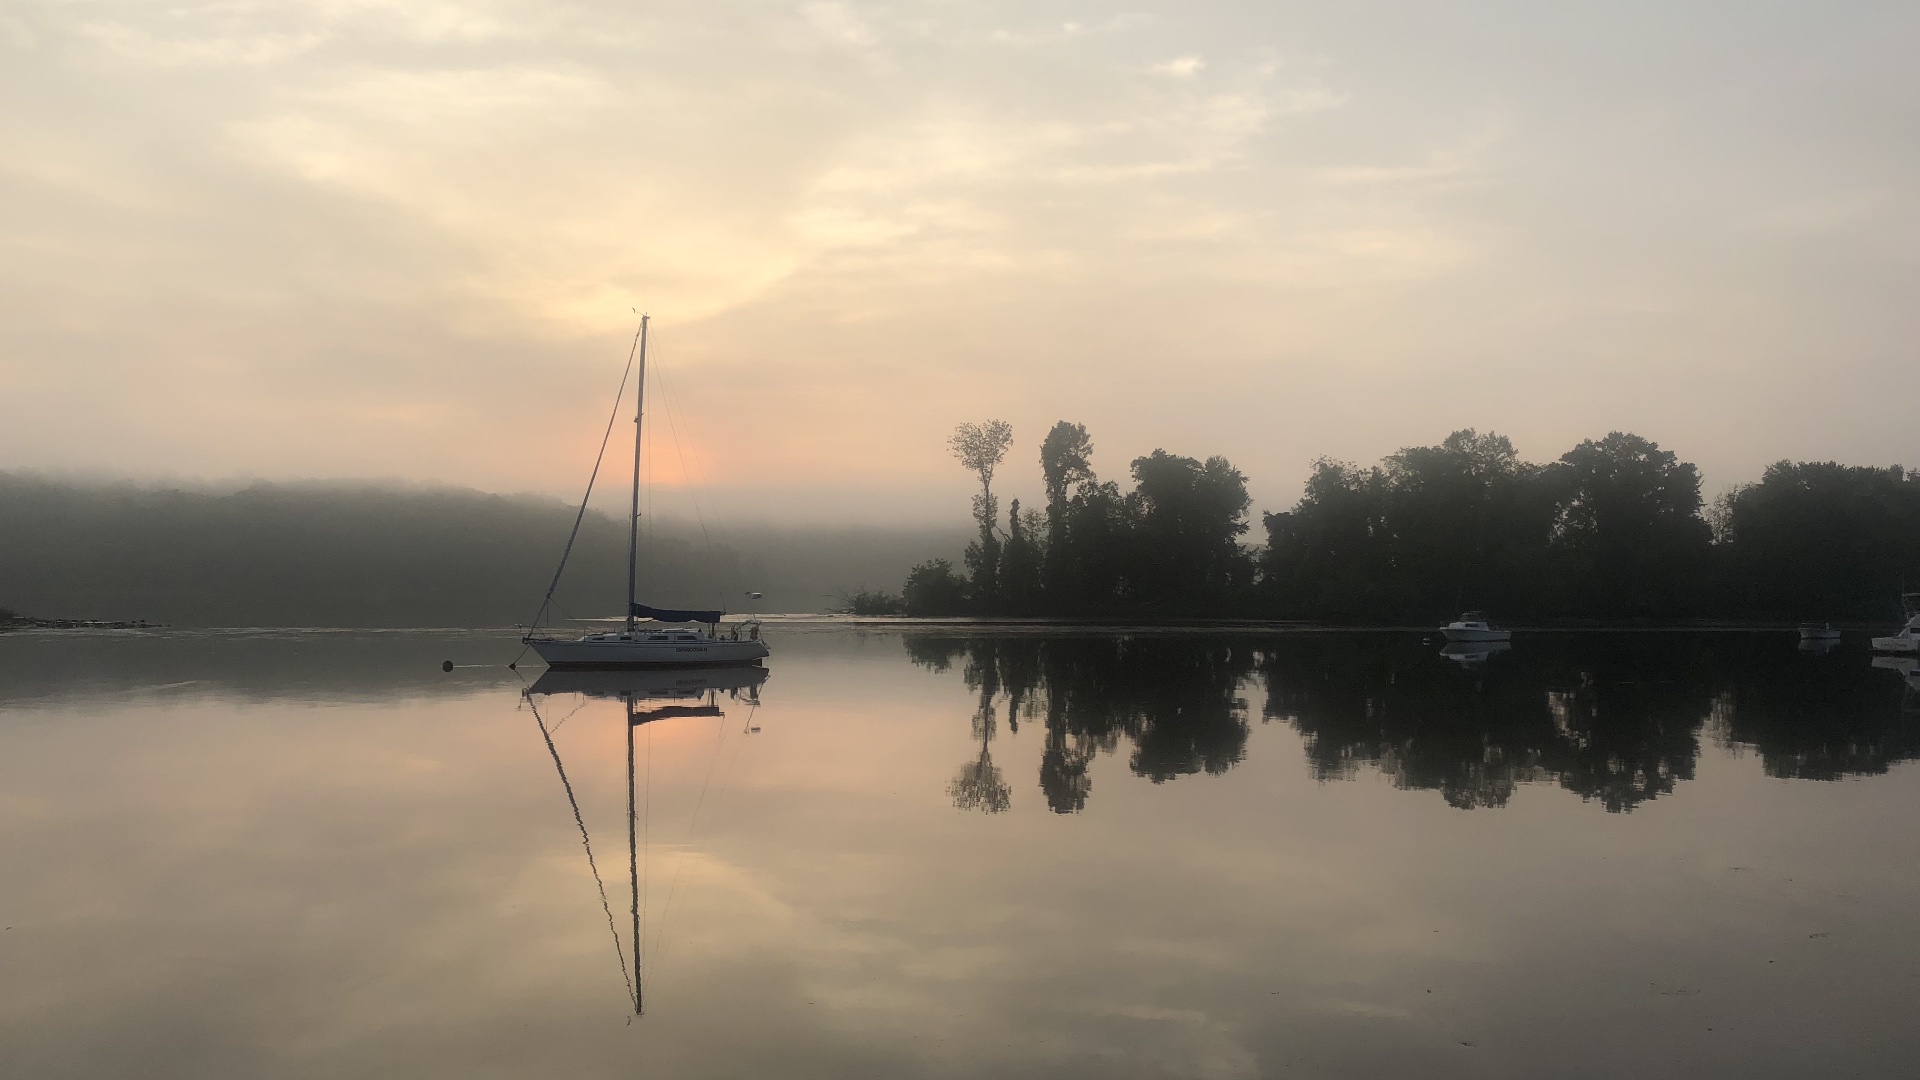 Single sailboat on a calm body of water surrounded by trees and mist